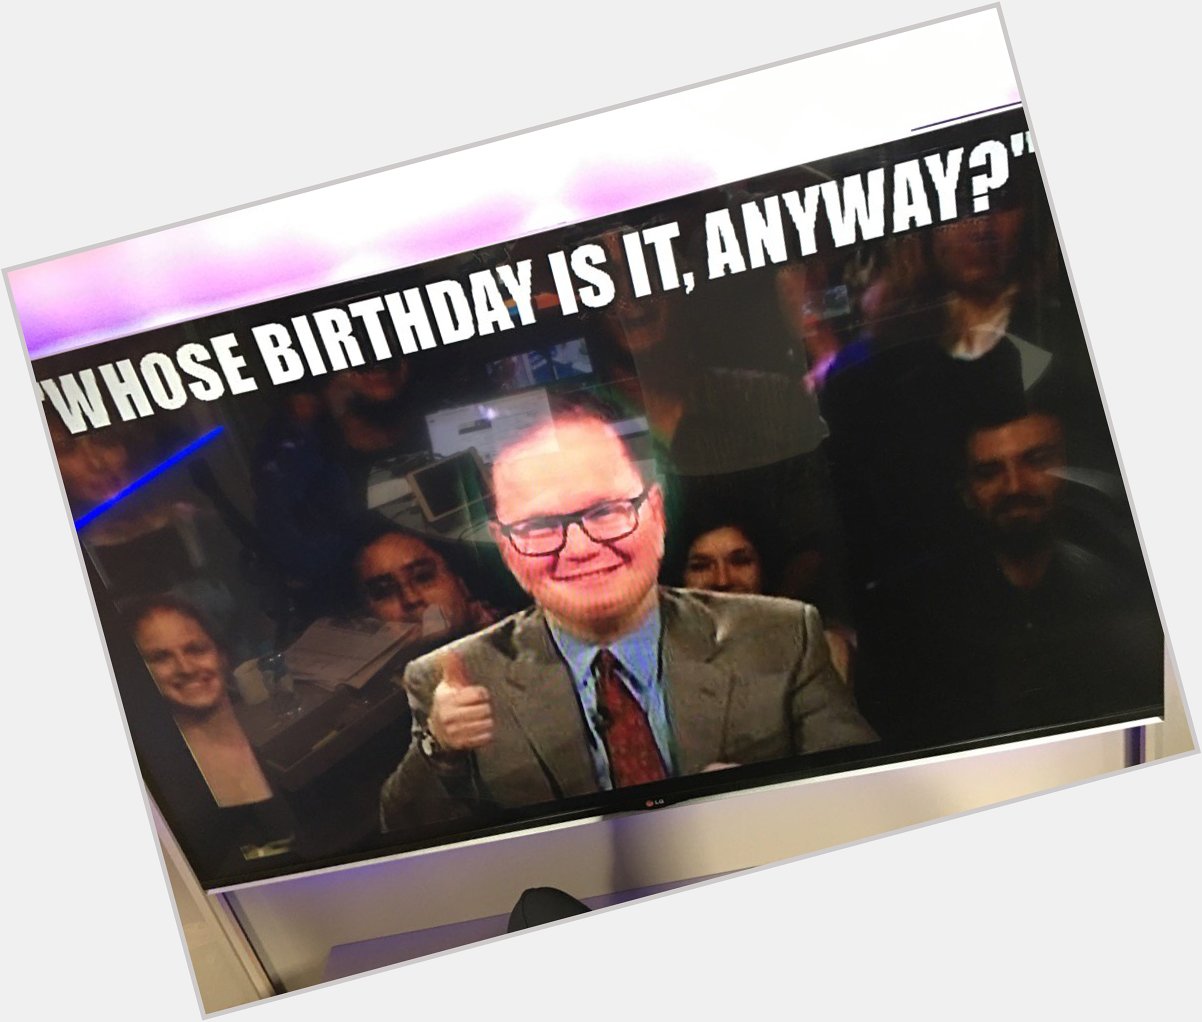 Our very own Drew Carey. Happy Birthday about time you tipped a winner  